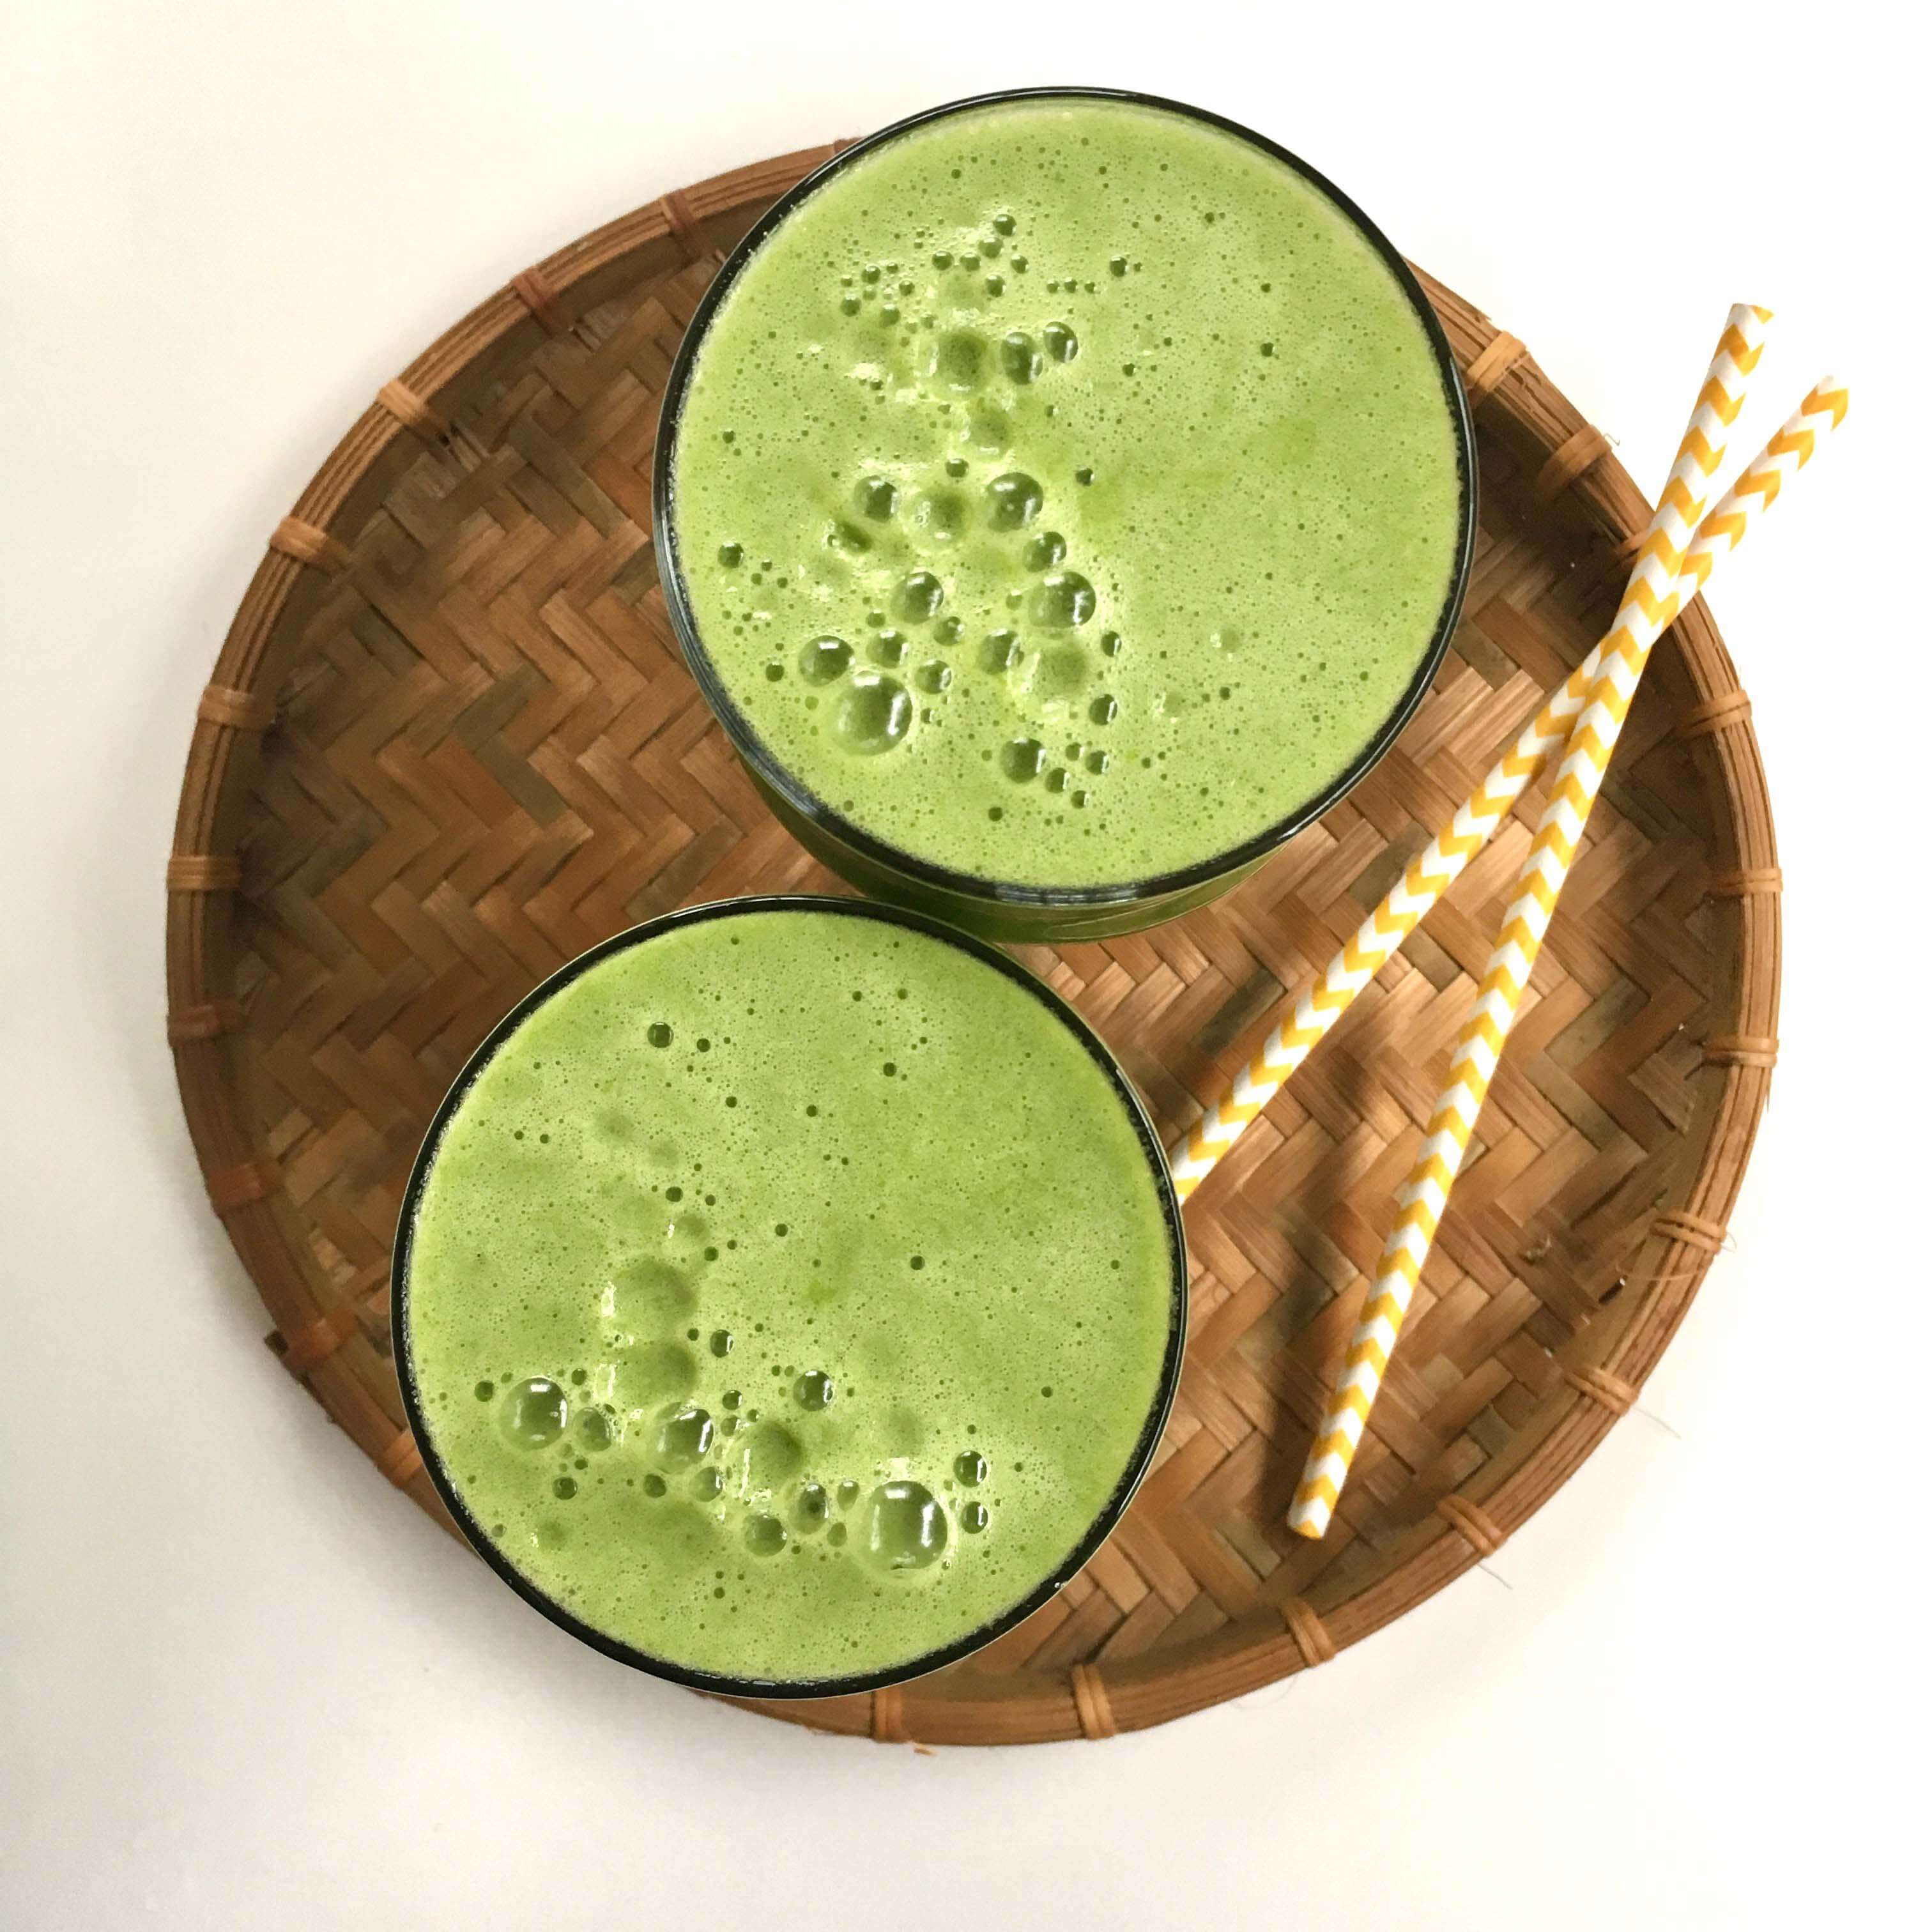 Green, frothy fresh pear juice in glasses on a bamboo mat with straws